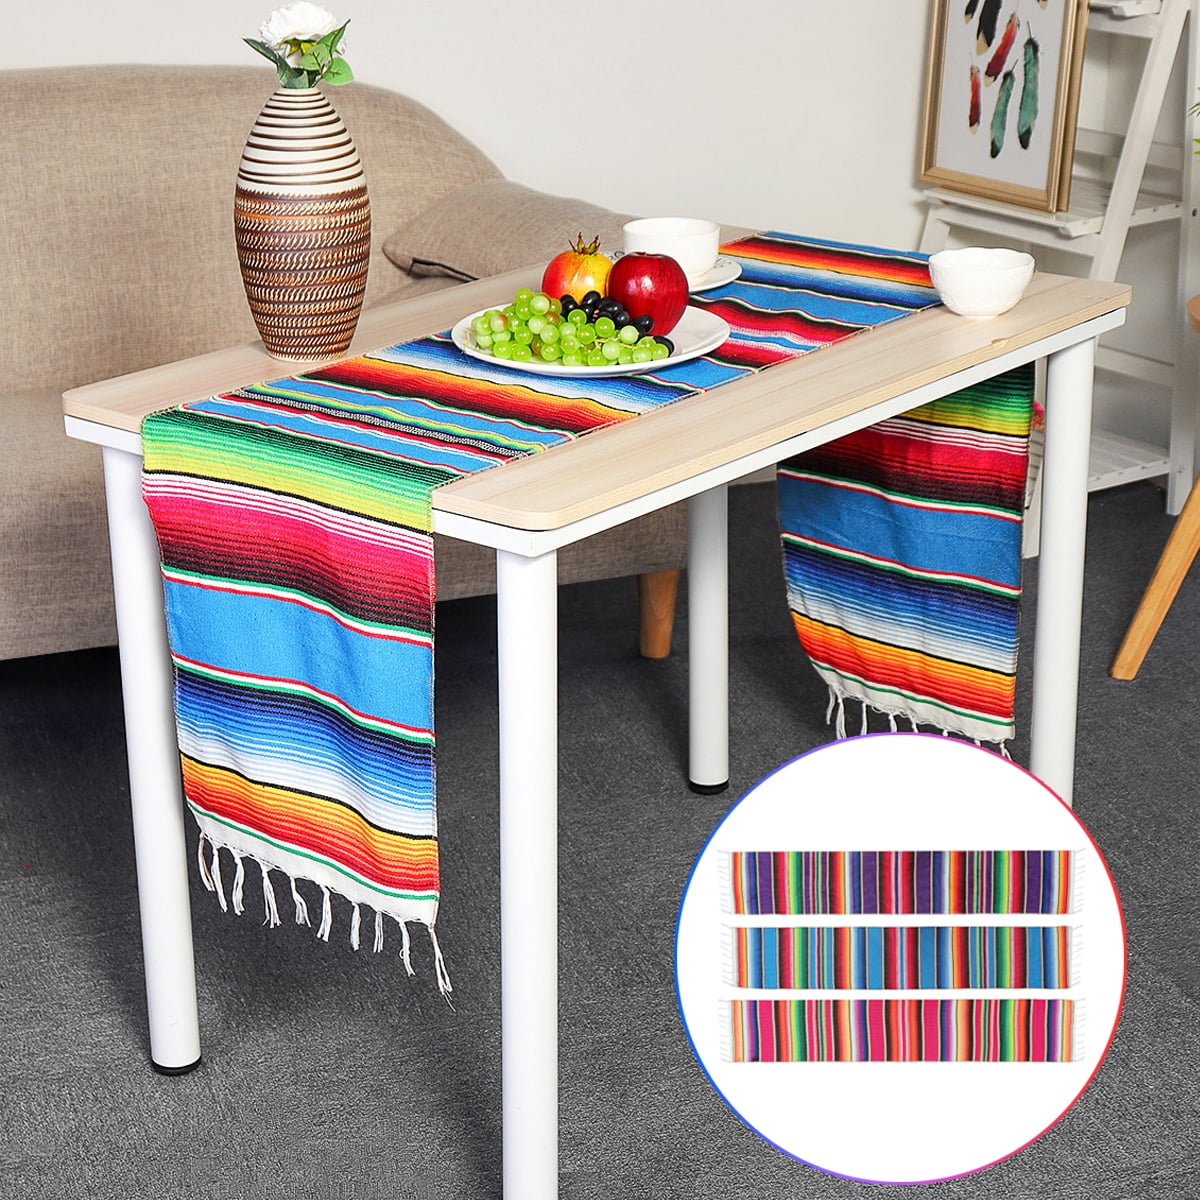 Mexican Serape Table Runner Festival Party Fringe Cotton Tablecloth Home Decor 